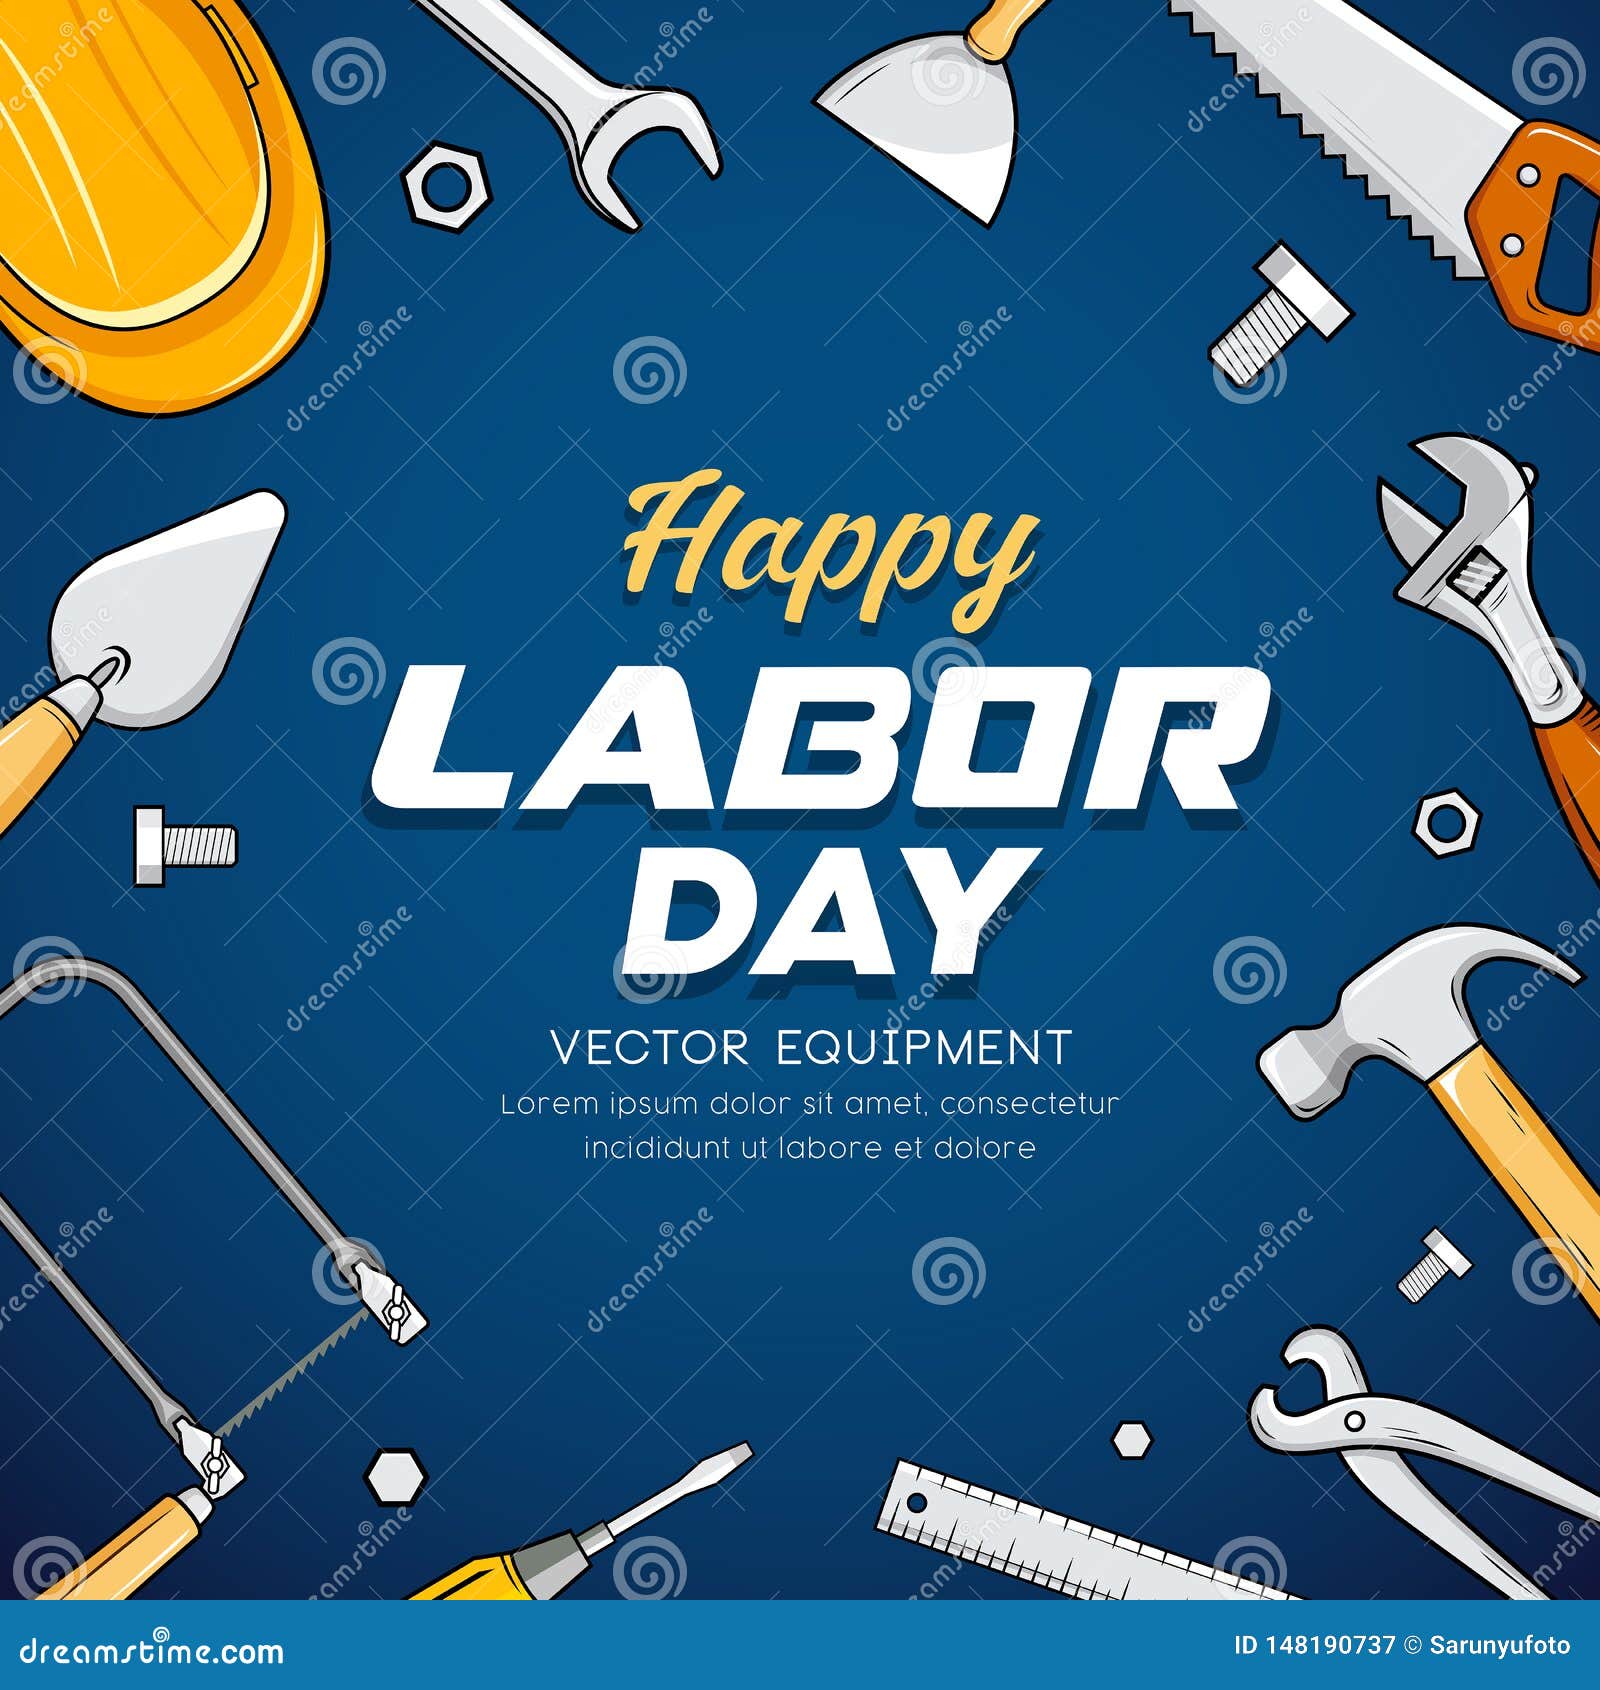 happy labor day construction equipment   on blue background